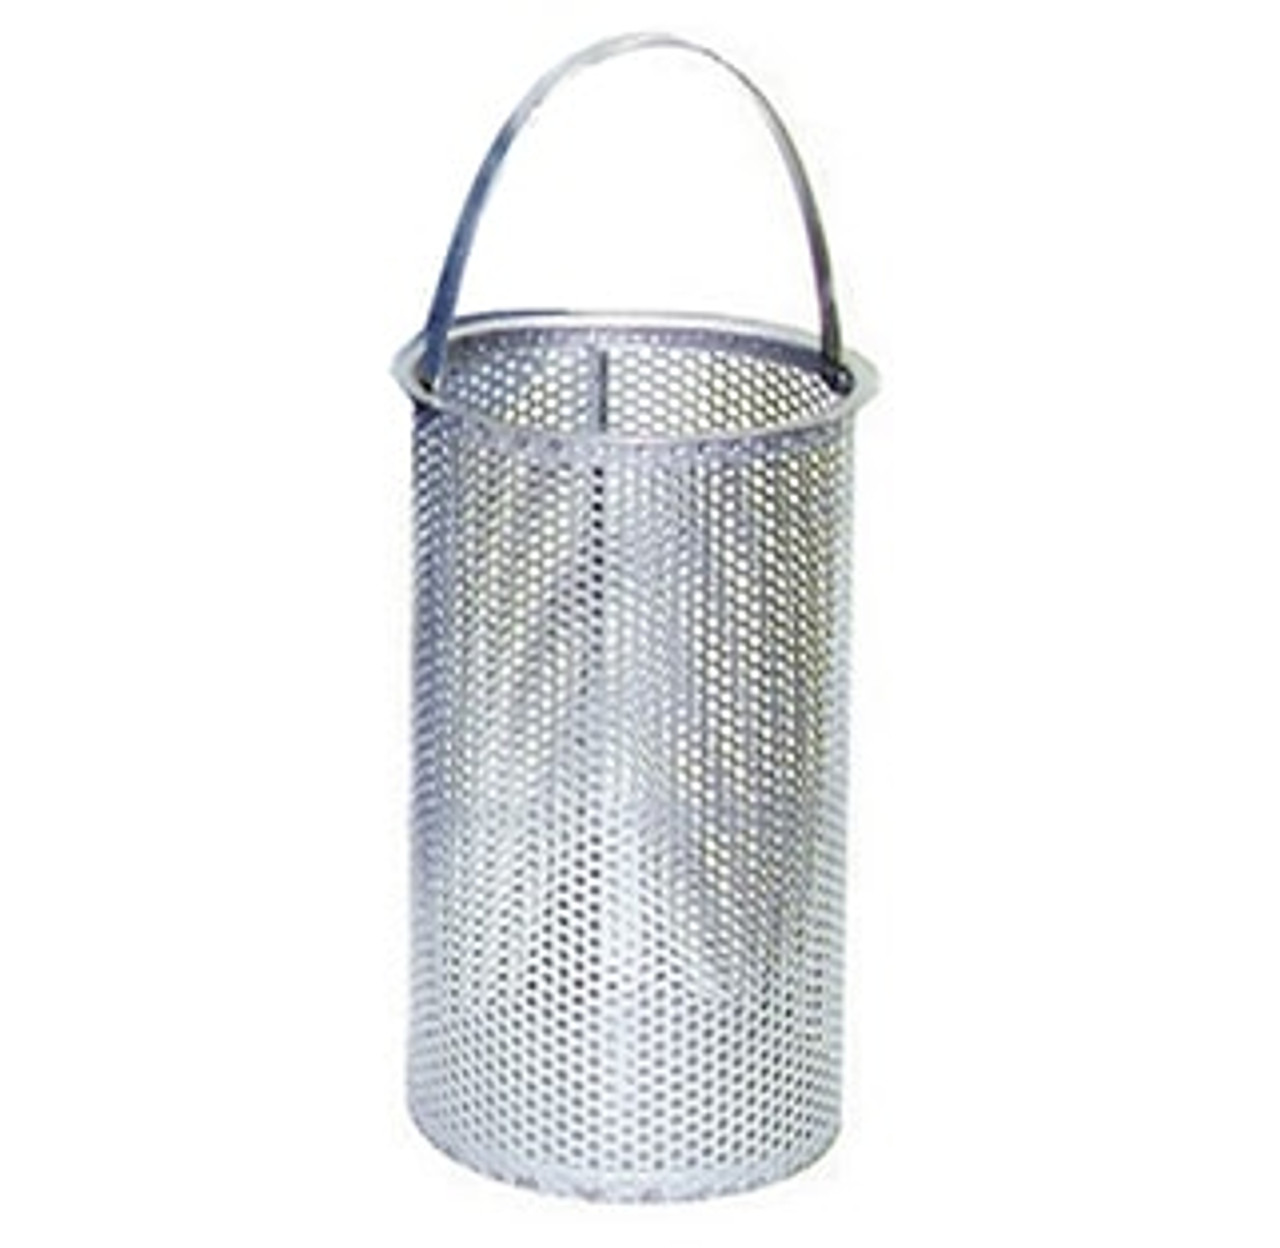 20 Mesh and 5/32" Perforation Replacement Basket for 5" Eaton Model 30R Strainer